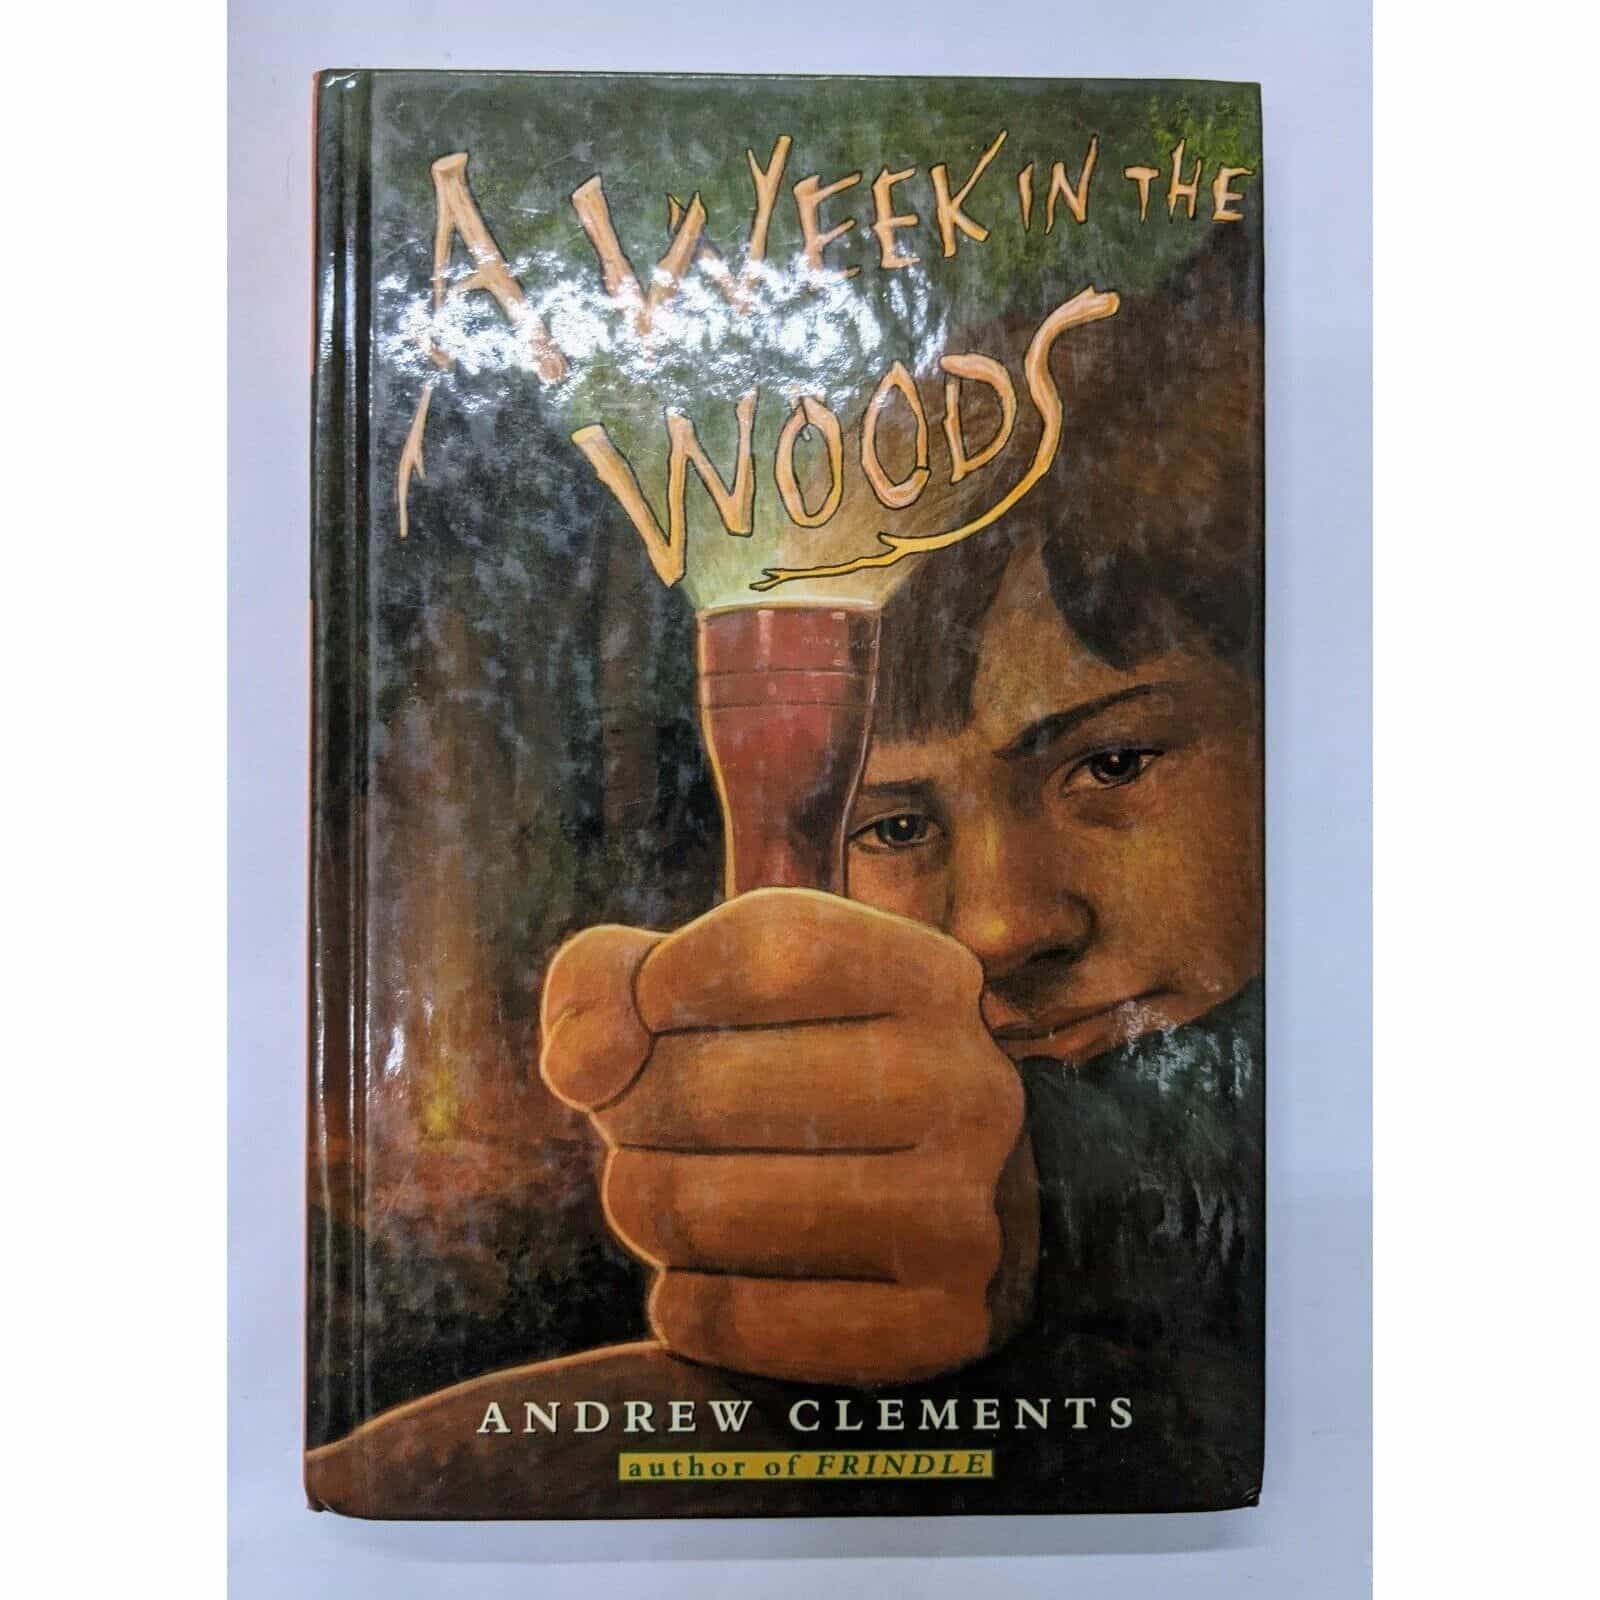 A Week On The Woods by Andrew Clements Book